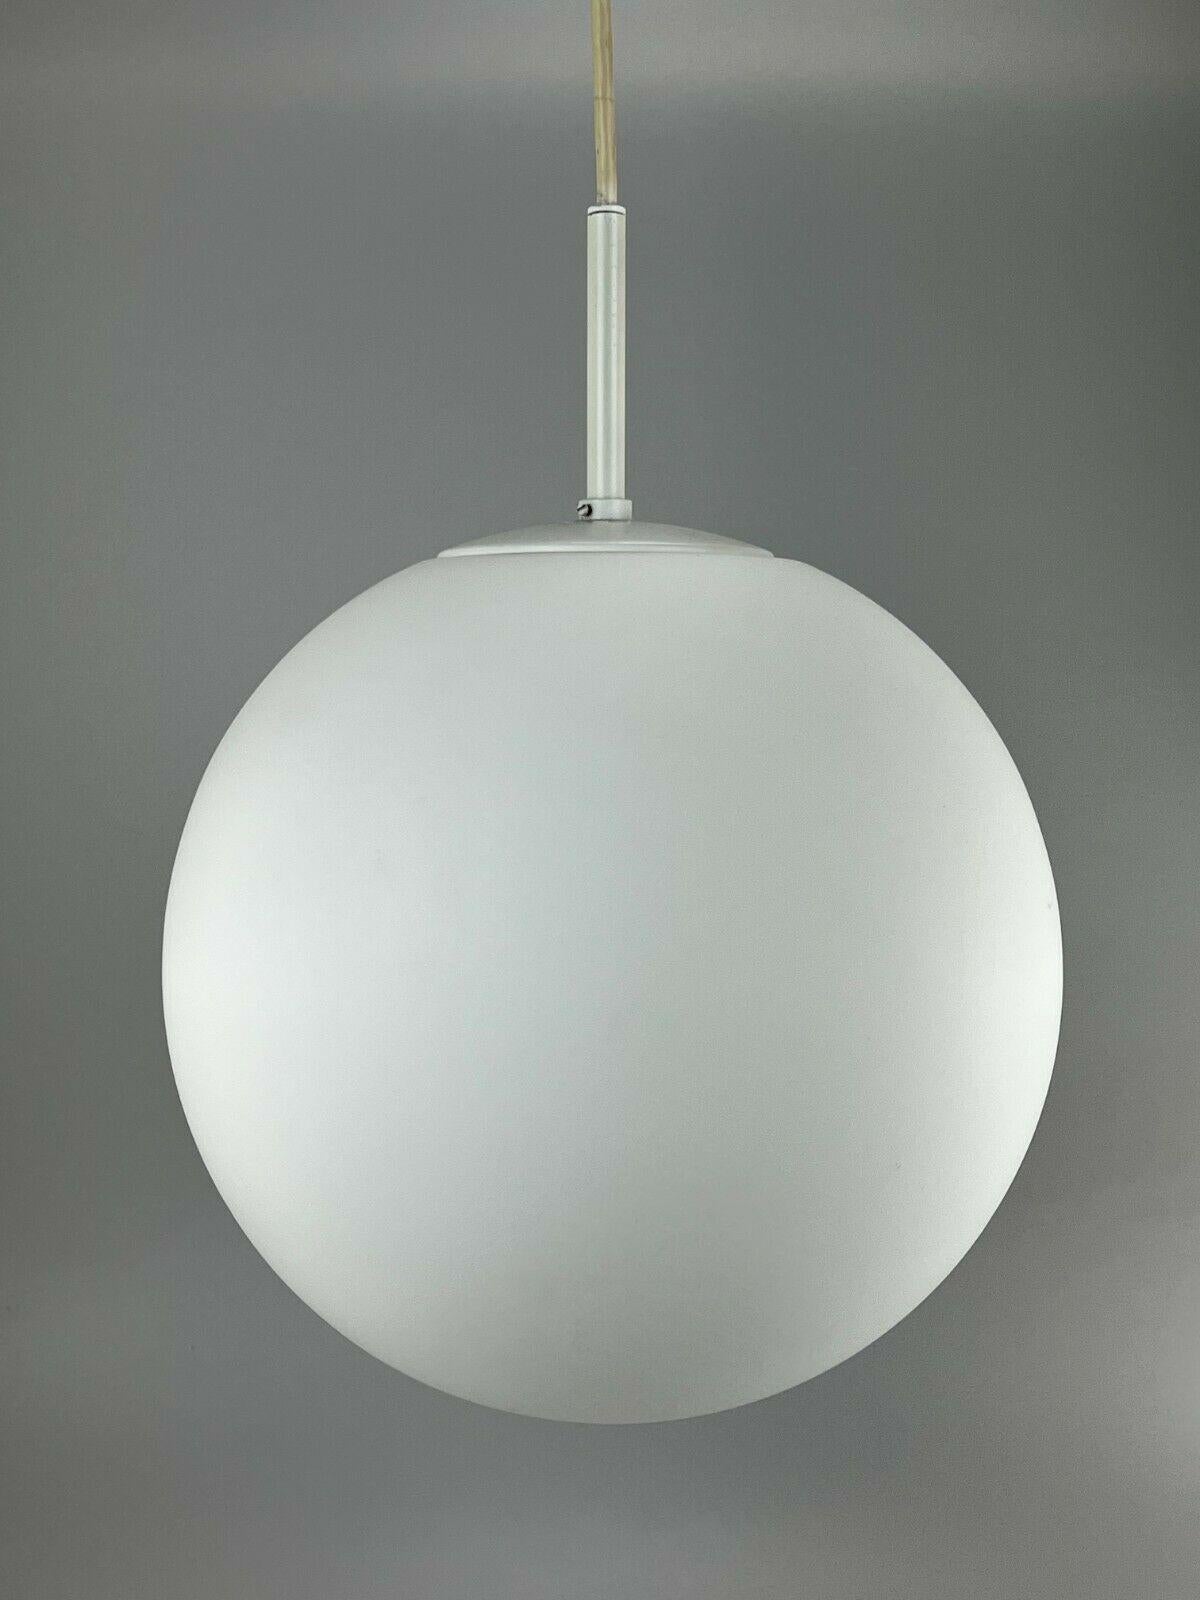 Xxl 60s 70s Lamp Light Ceiling Lamp Limburg Spherical Lamp Ball Design  In Good Condition For Sale In Neuenkirchen, NI